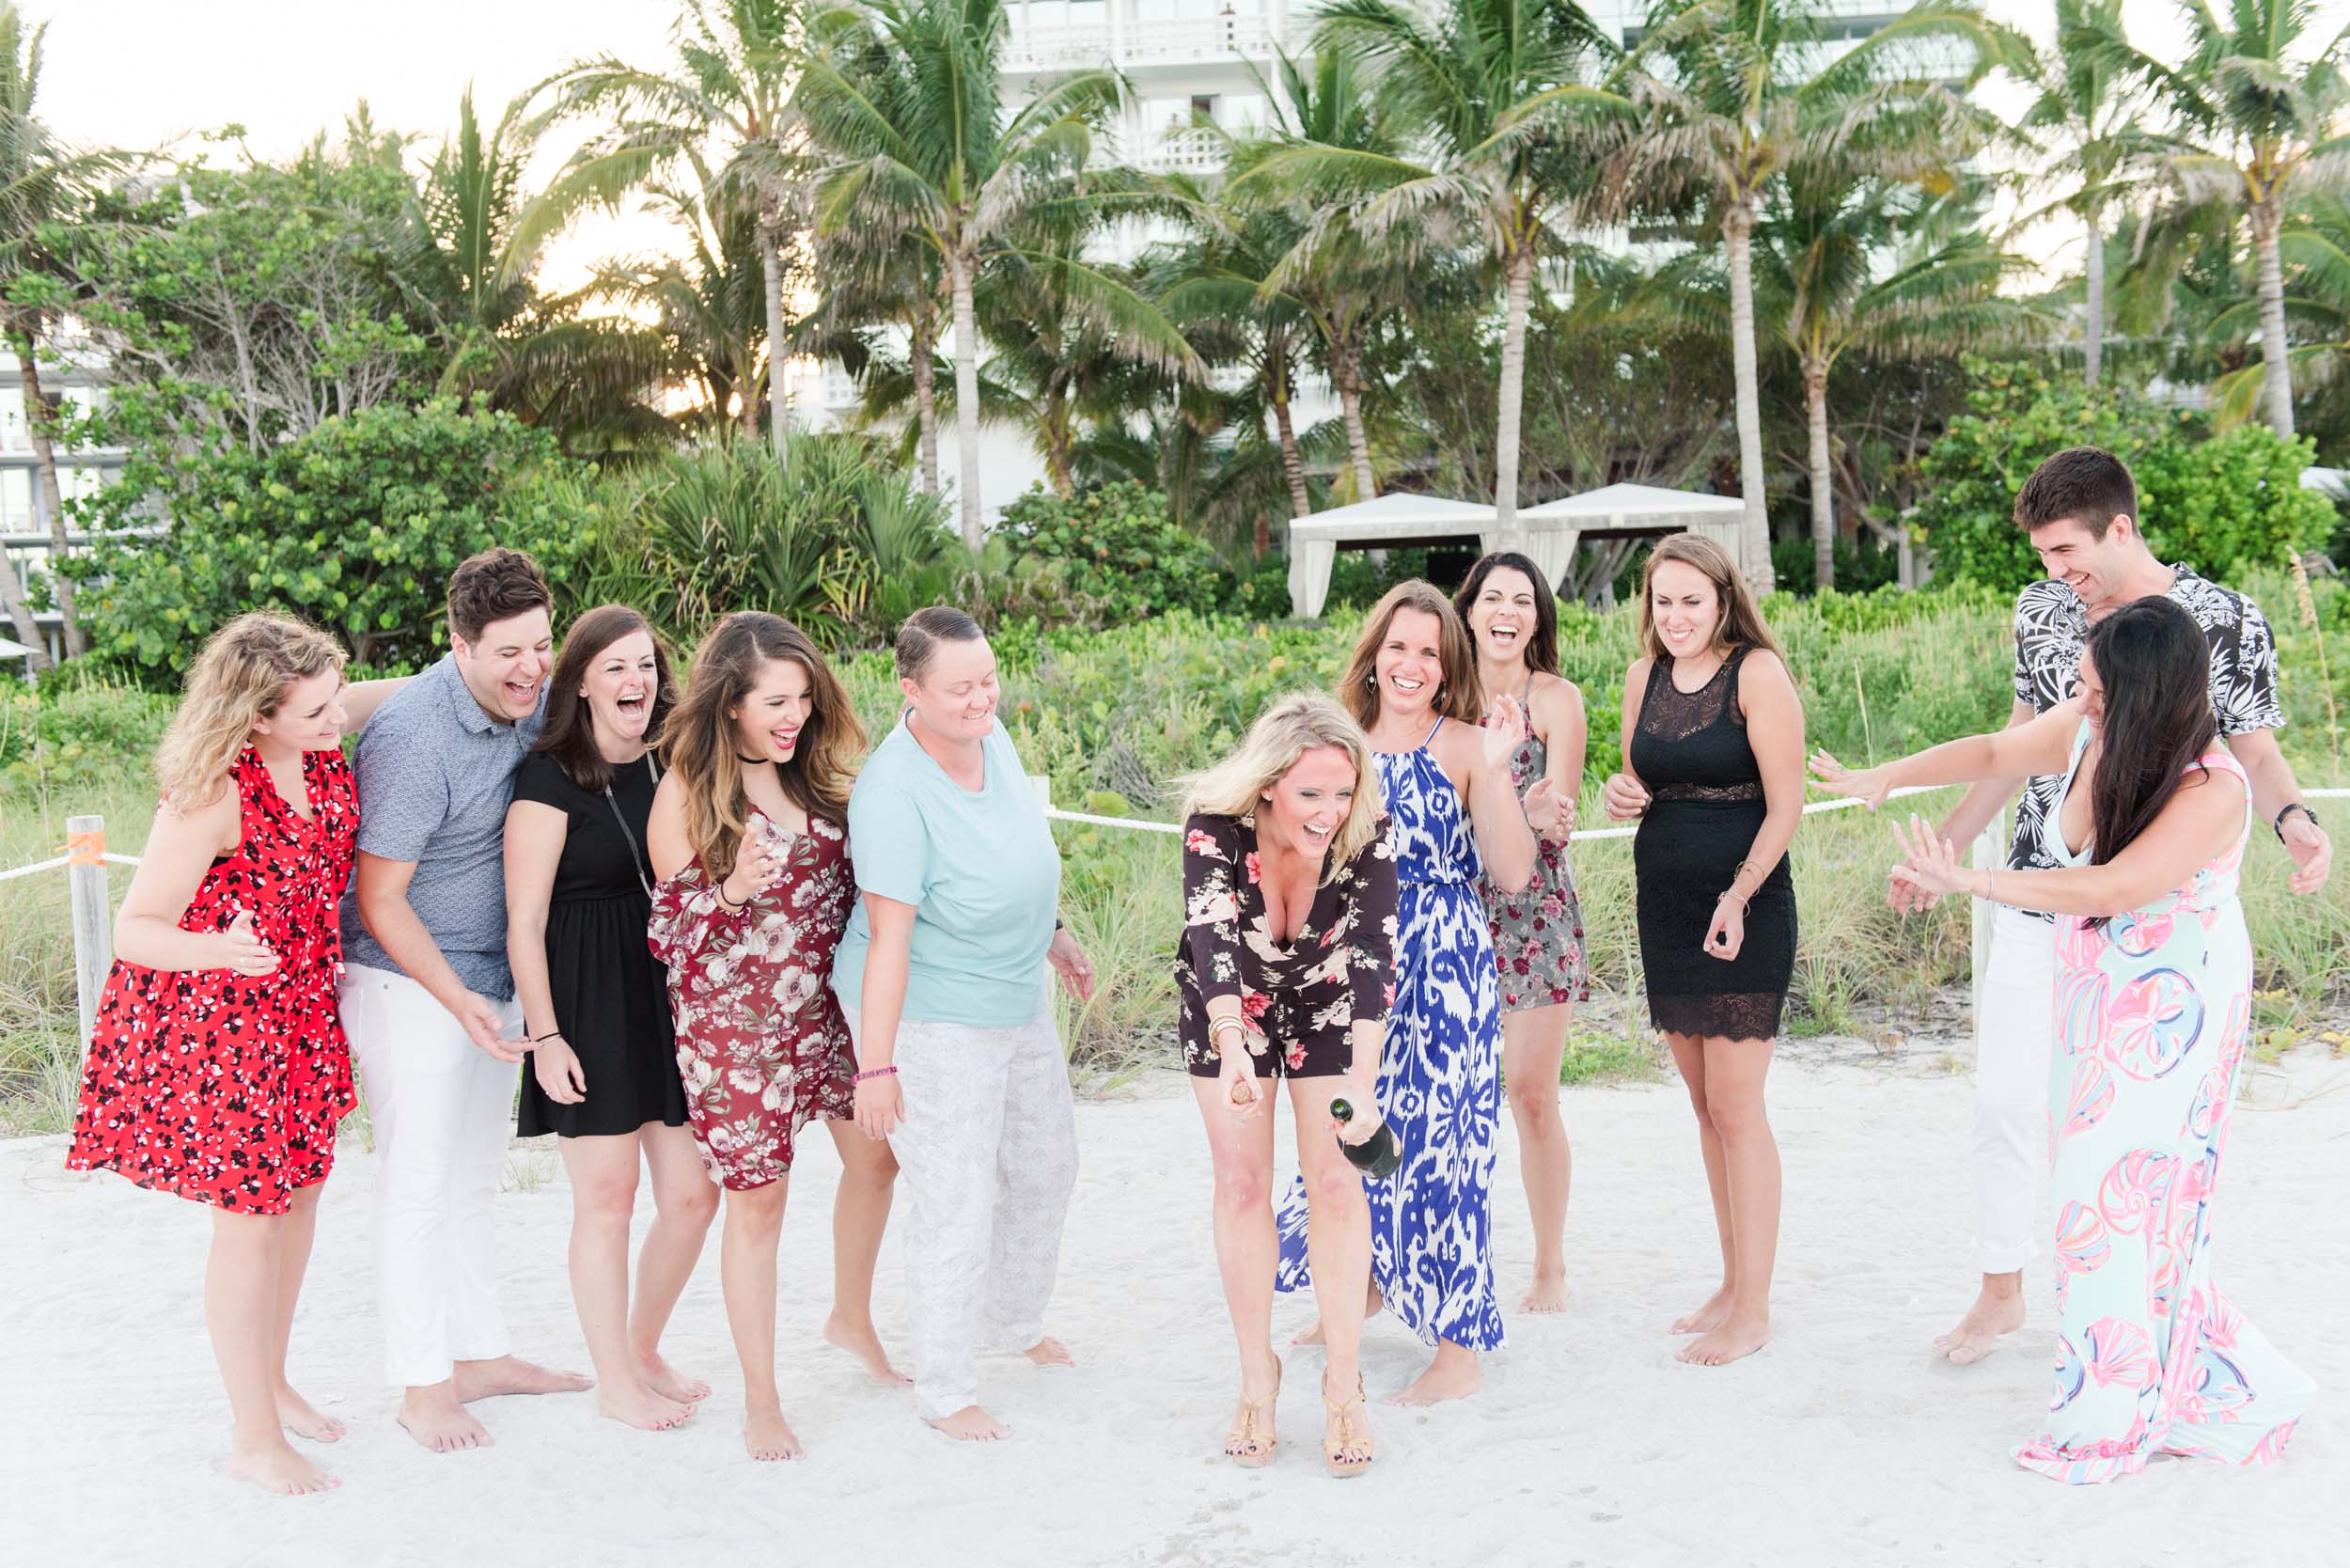 How To Plan A Palm Springs Bachelorette - Kristy By The Sea